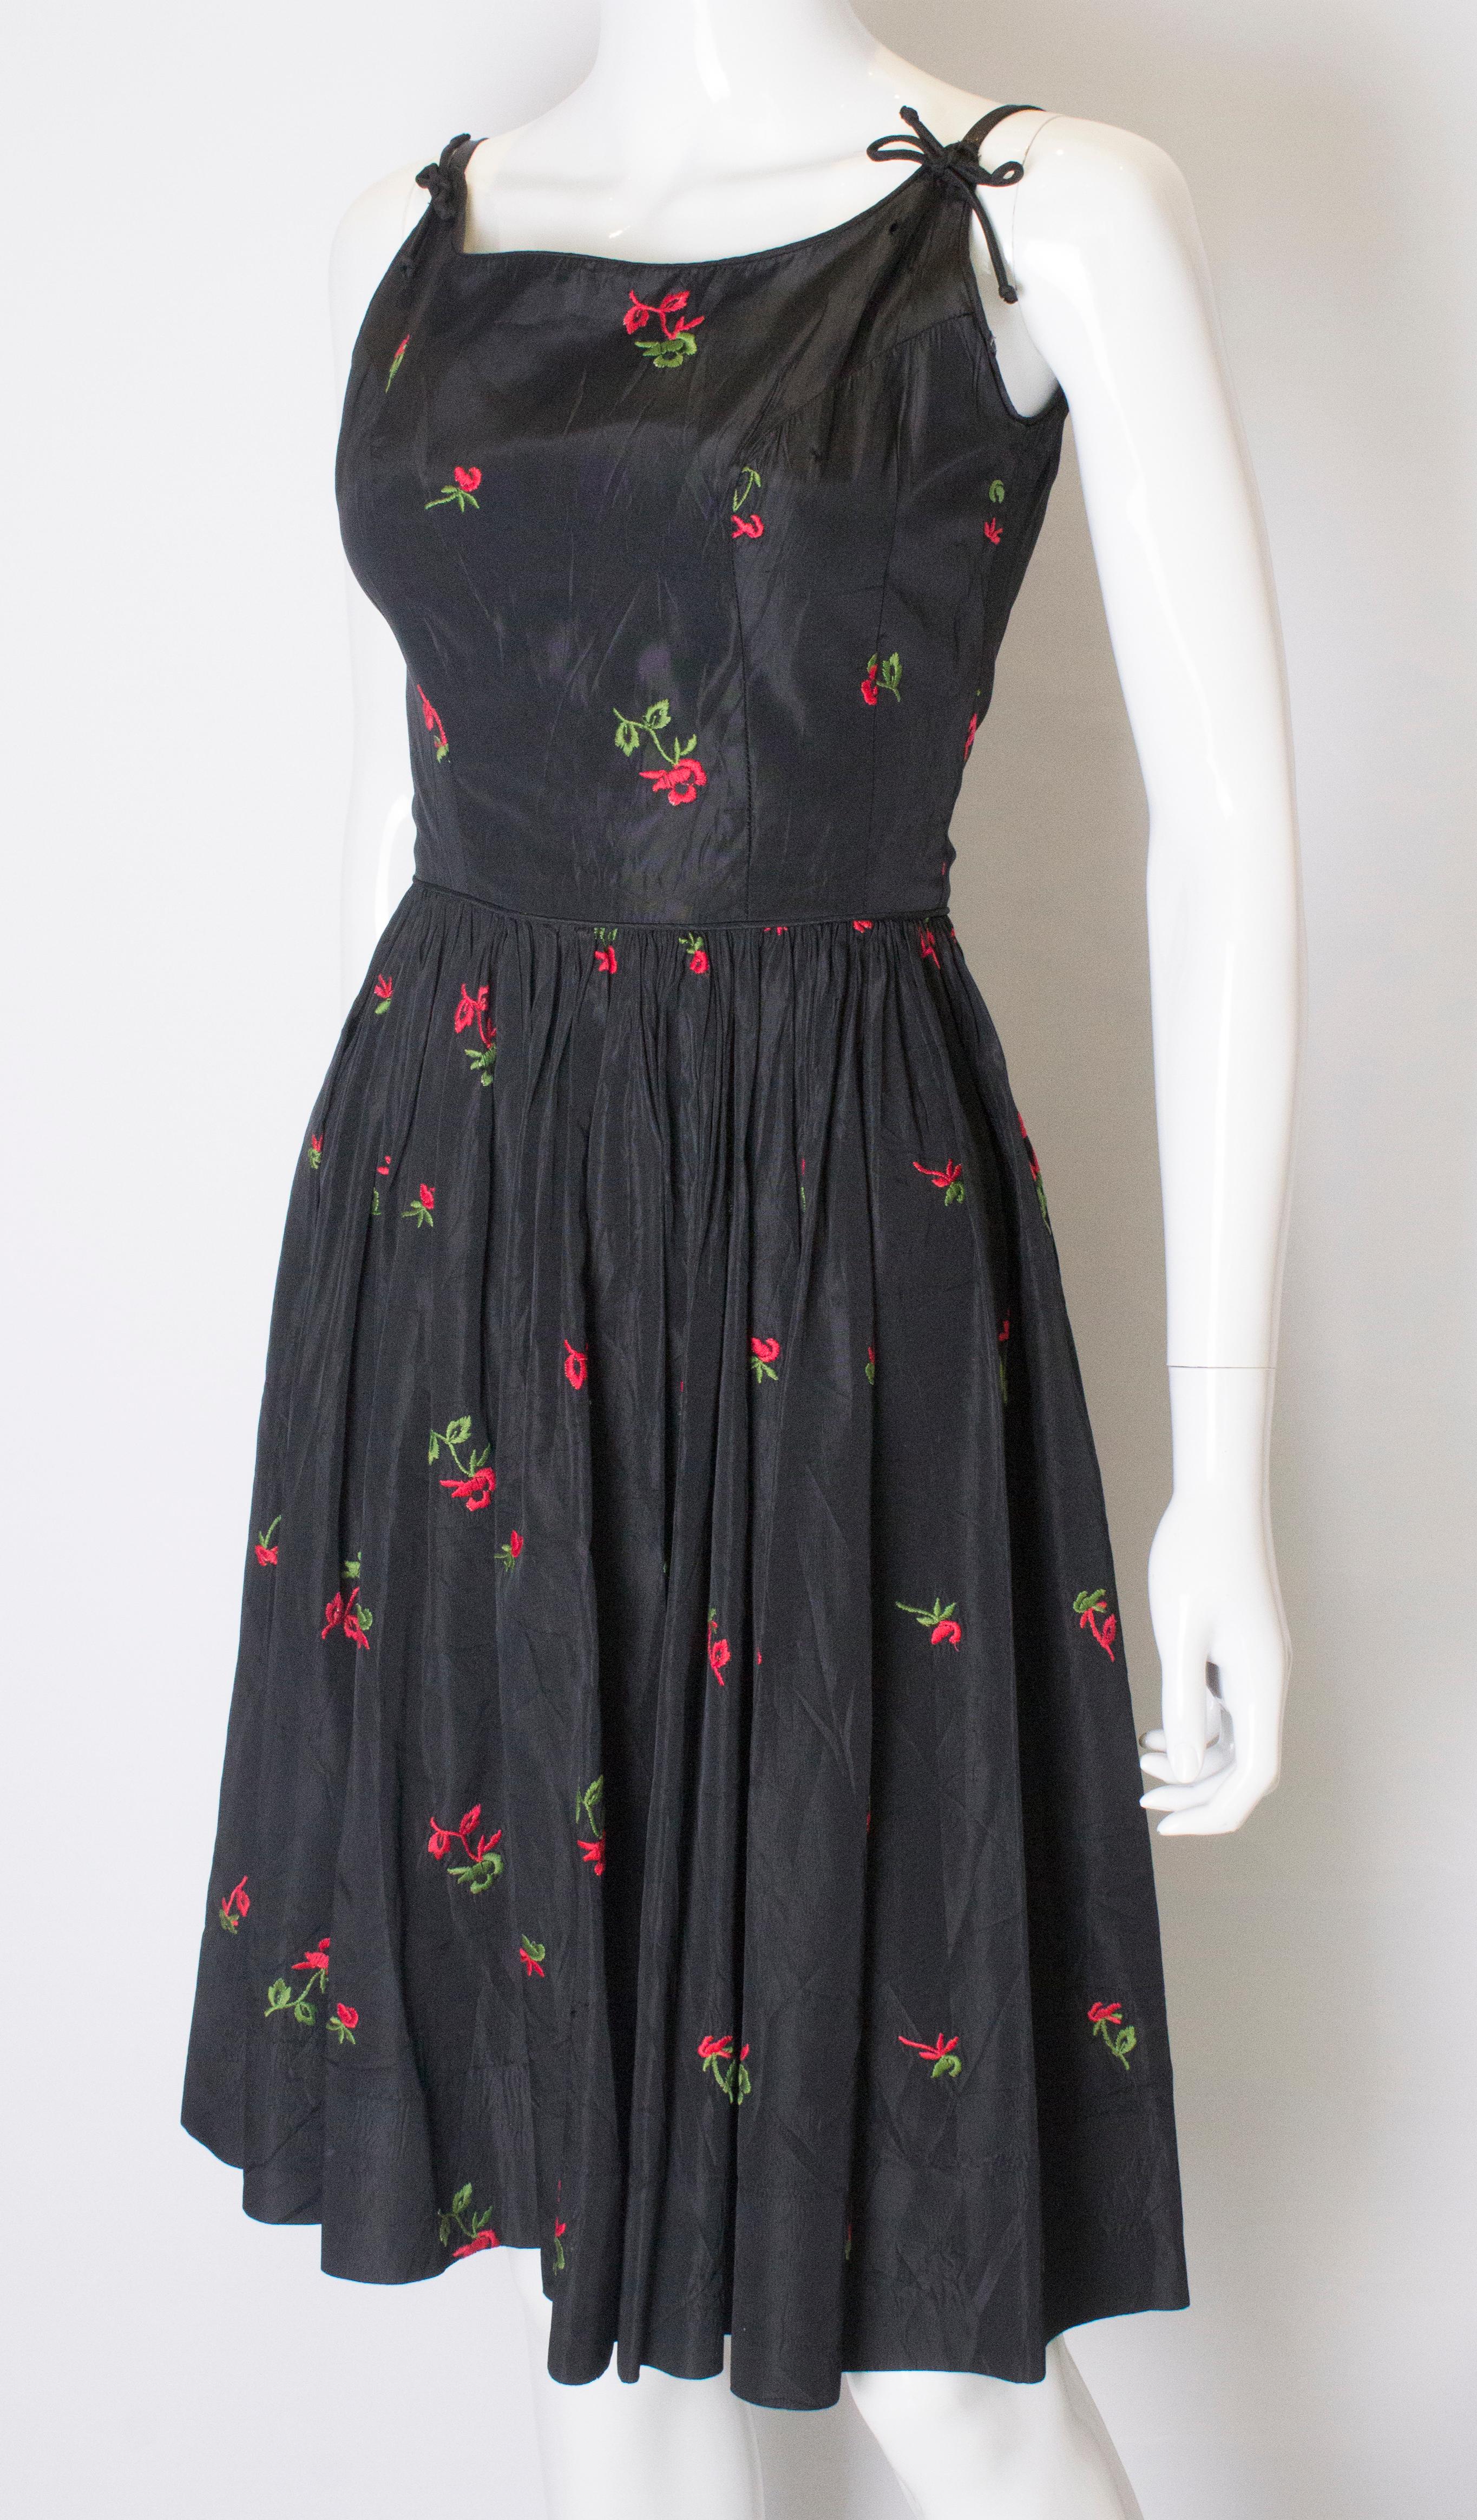 Black A vintage 1950s black cinch swing dress with embroidered flowers 